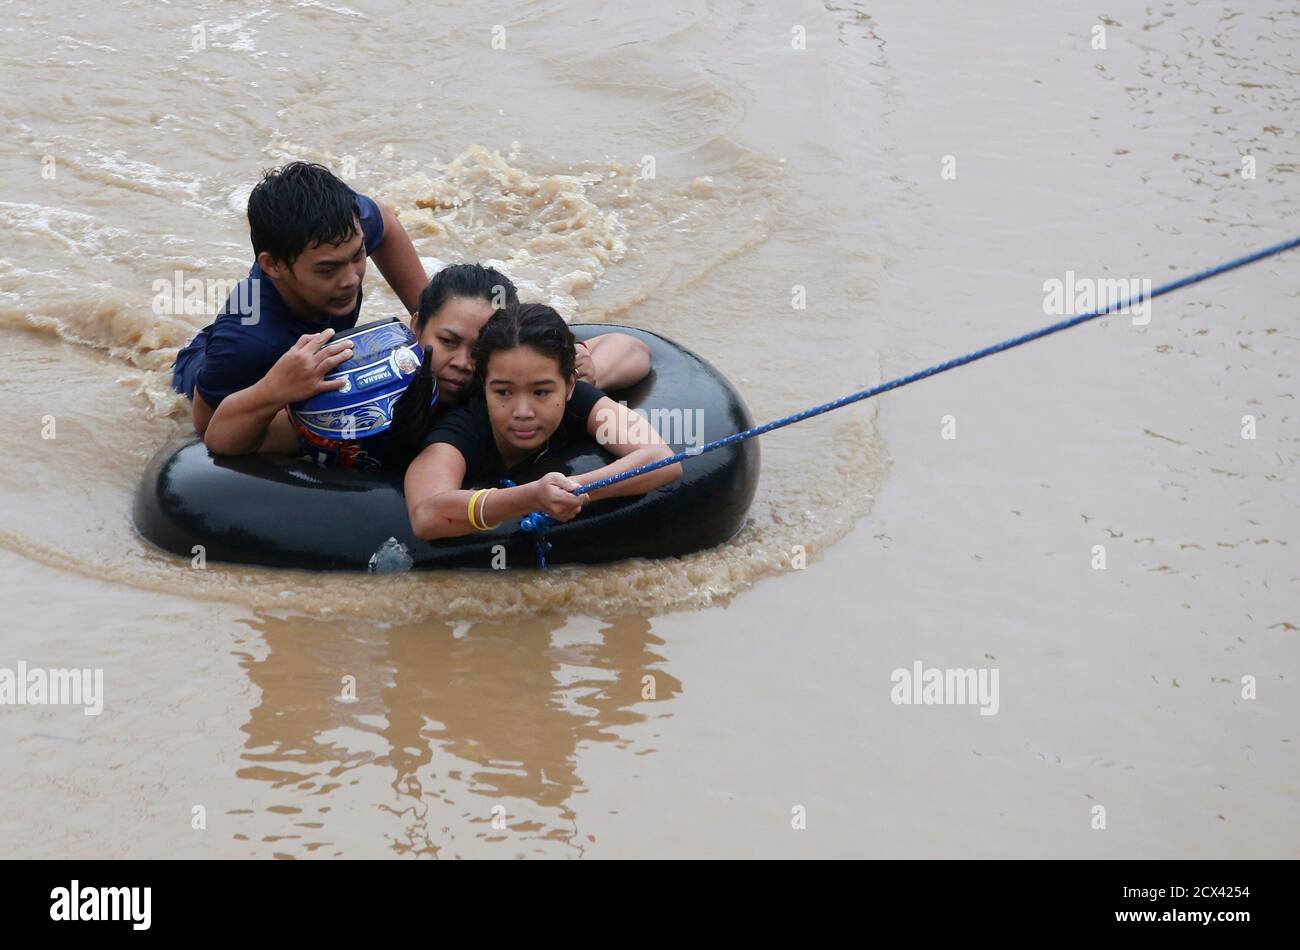 Flood victims are pulled on an inflatable tire tube as they are evacuated from heavy flooding brought by tropical depression 'Agaton' in Butuan, in the southern Philippine island of Mindanao January 20, 2014. Floods and landslides caused by tropical depression 'Agaton'  have killed 40 people and more than 500,000 people are displaced in Mindanao, the National Disaster Risk Reduction and Management Council reported on Sunday.   REUTERS/Erik De Castro (PHILIPPINES - Tags: DISASTER ENVIRONMENT) Stock Photo